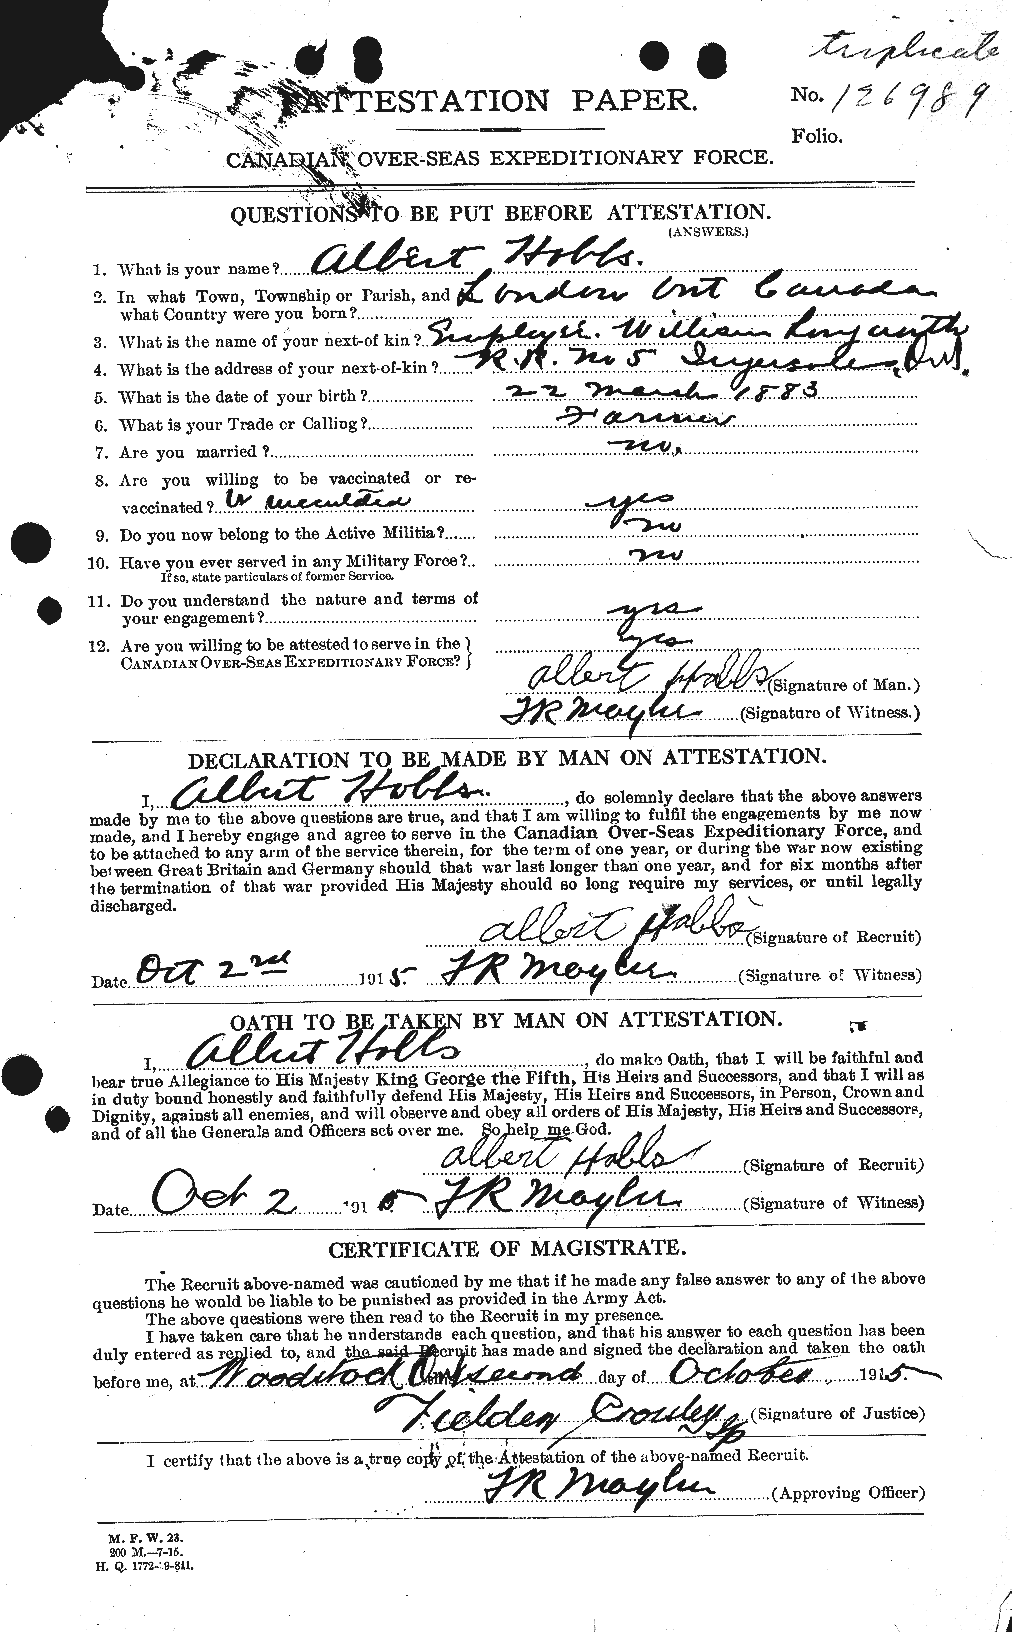 Personnel Records of the First World War - CEF 394900a